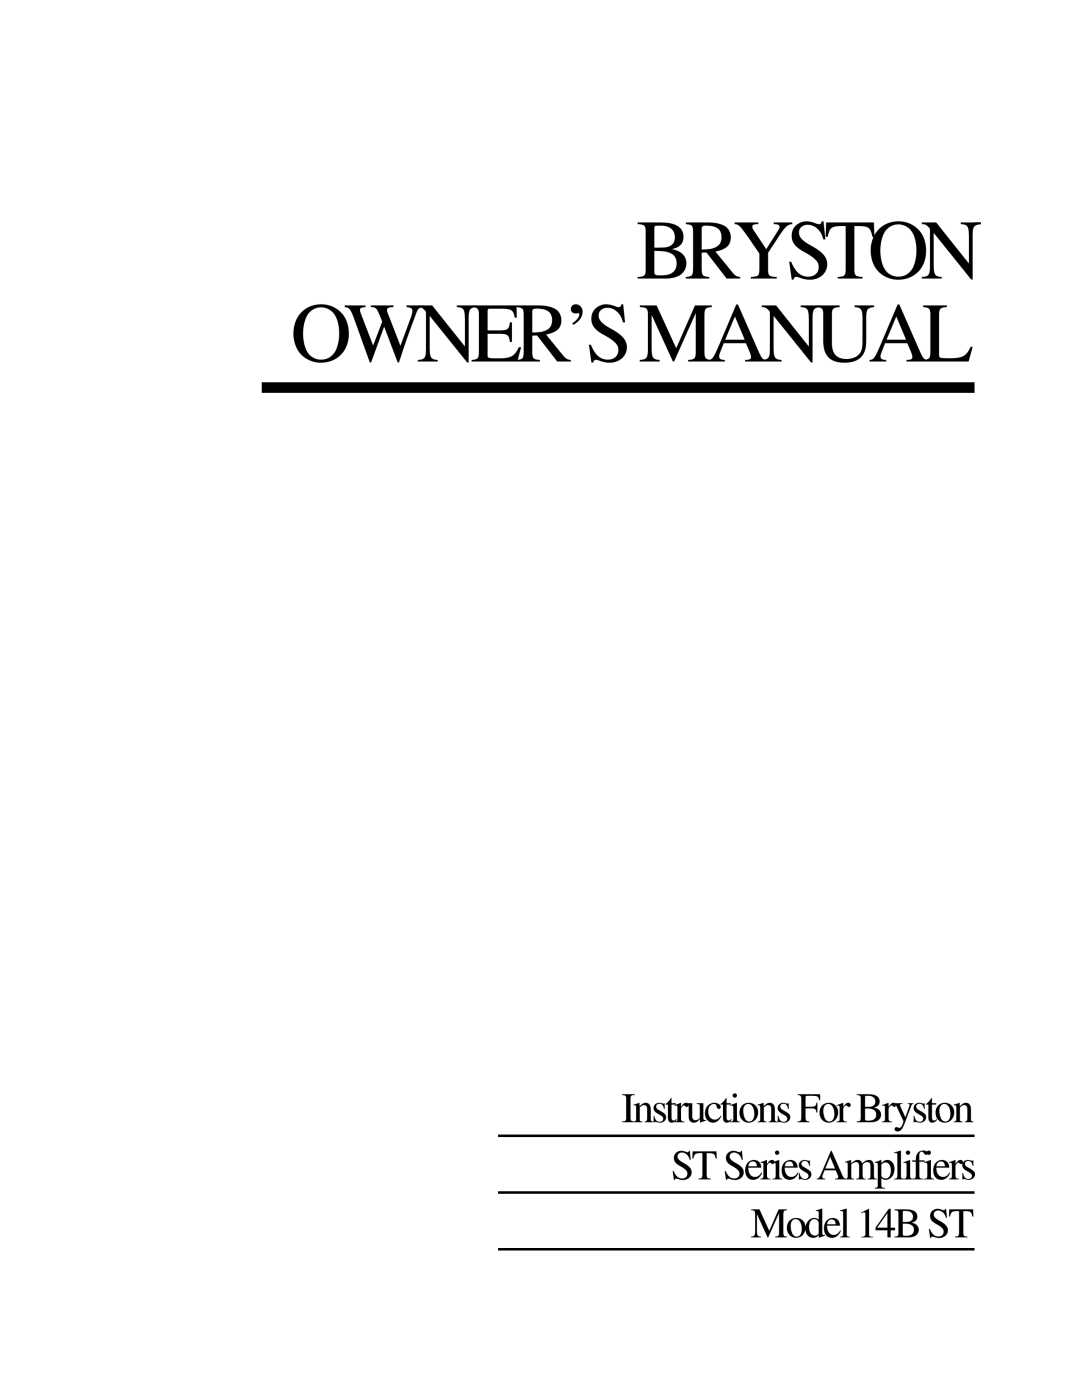 Bryston l14BST owner manual Bryston Owner’Smanual, Instructions For Bryston ST SeriesAmplifiers, Model 14B ST 